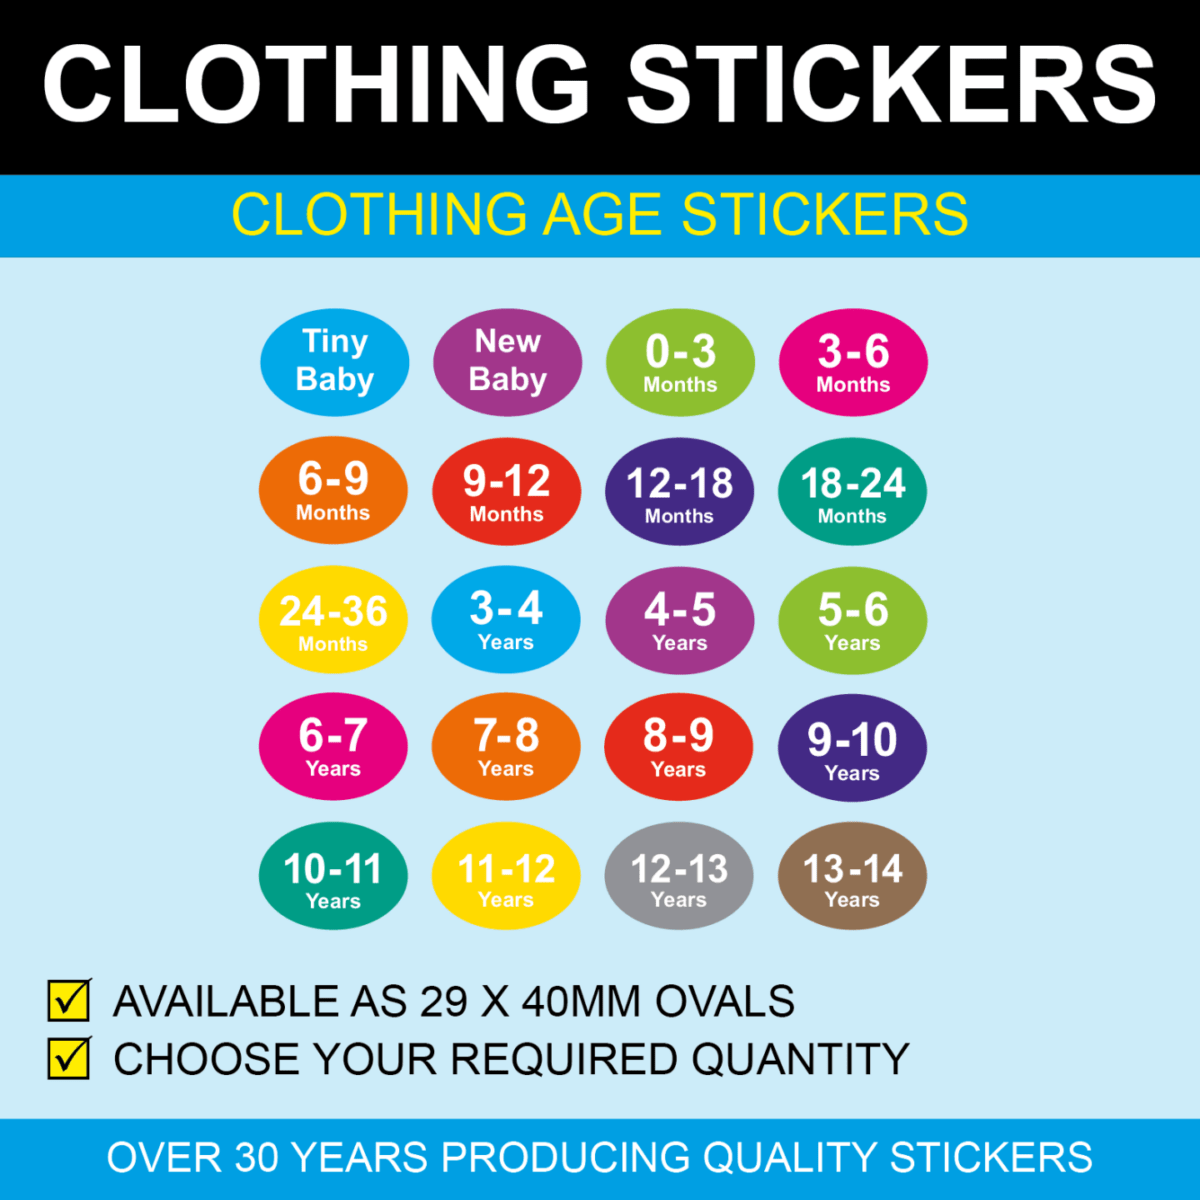 The Different Types of Clothing Stickers - Price Stickers